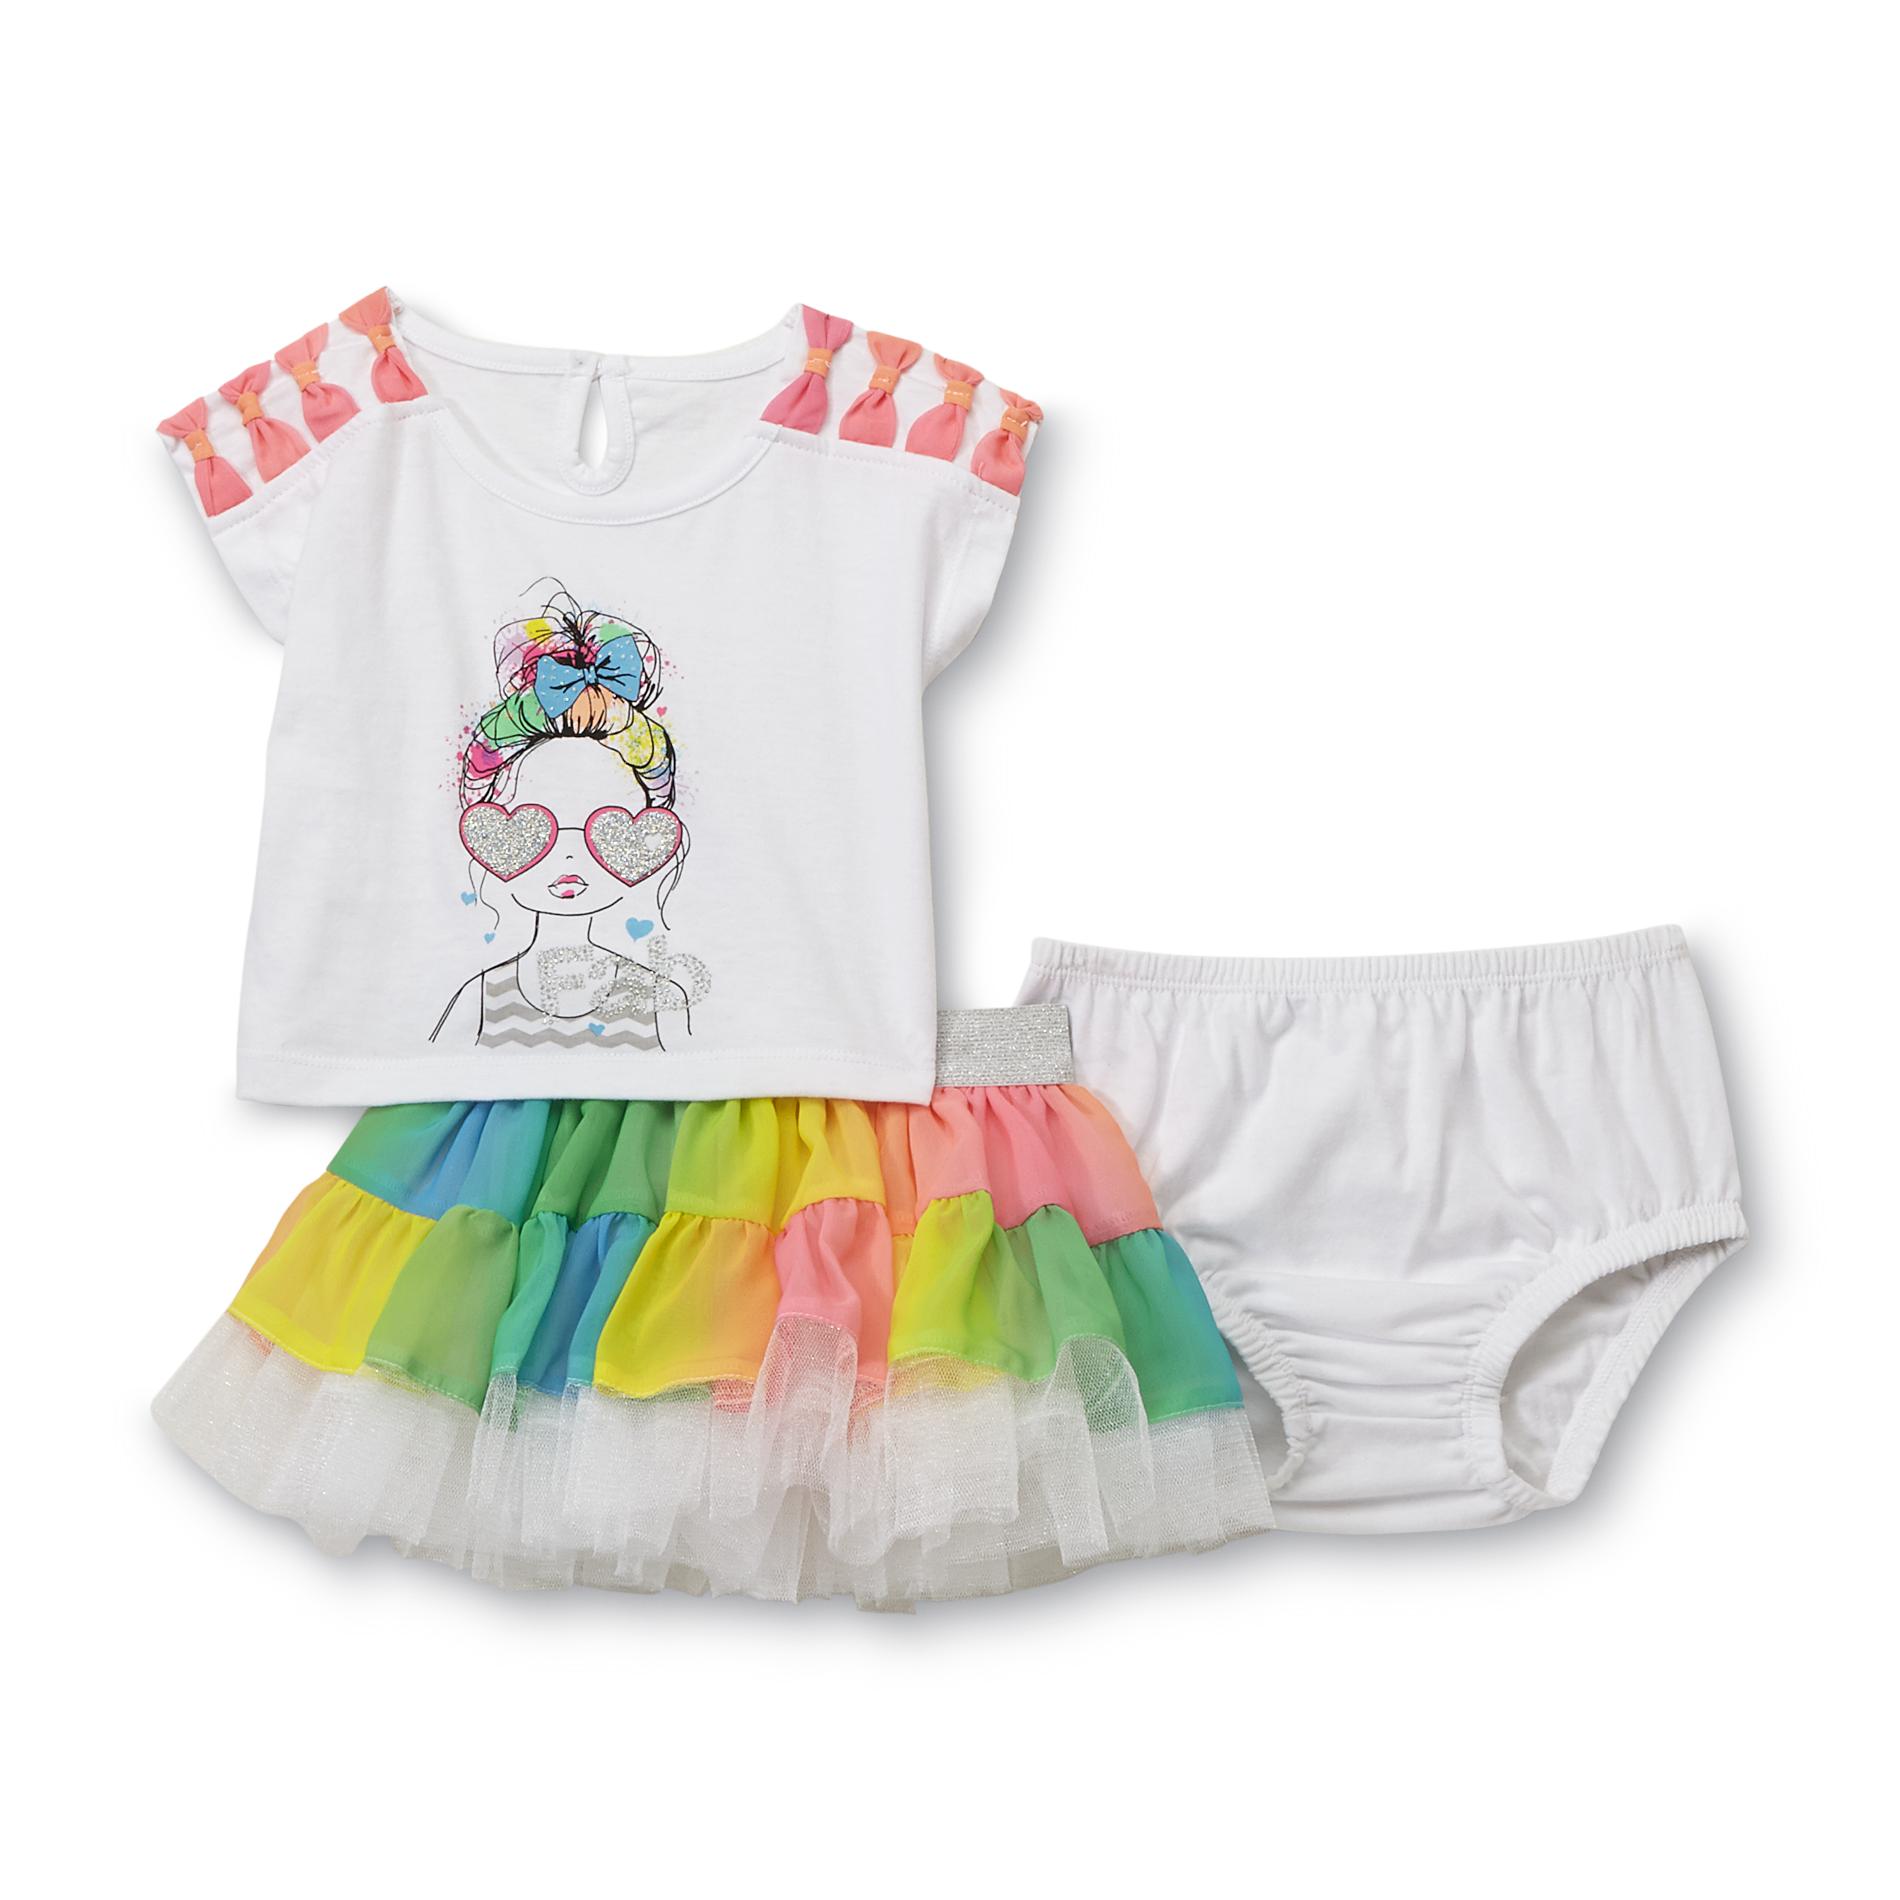 Piper Infant & Toddler Girl's Graphic T-Shirt and Tutu Skirt Set